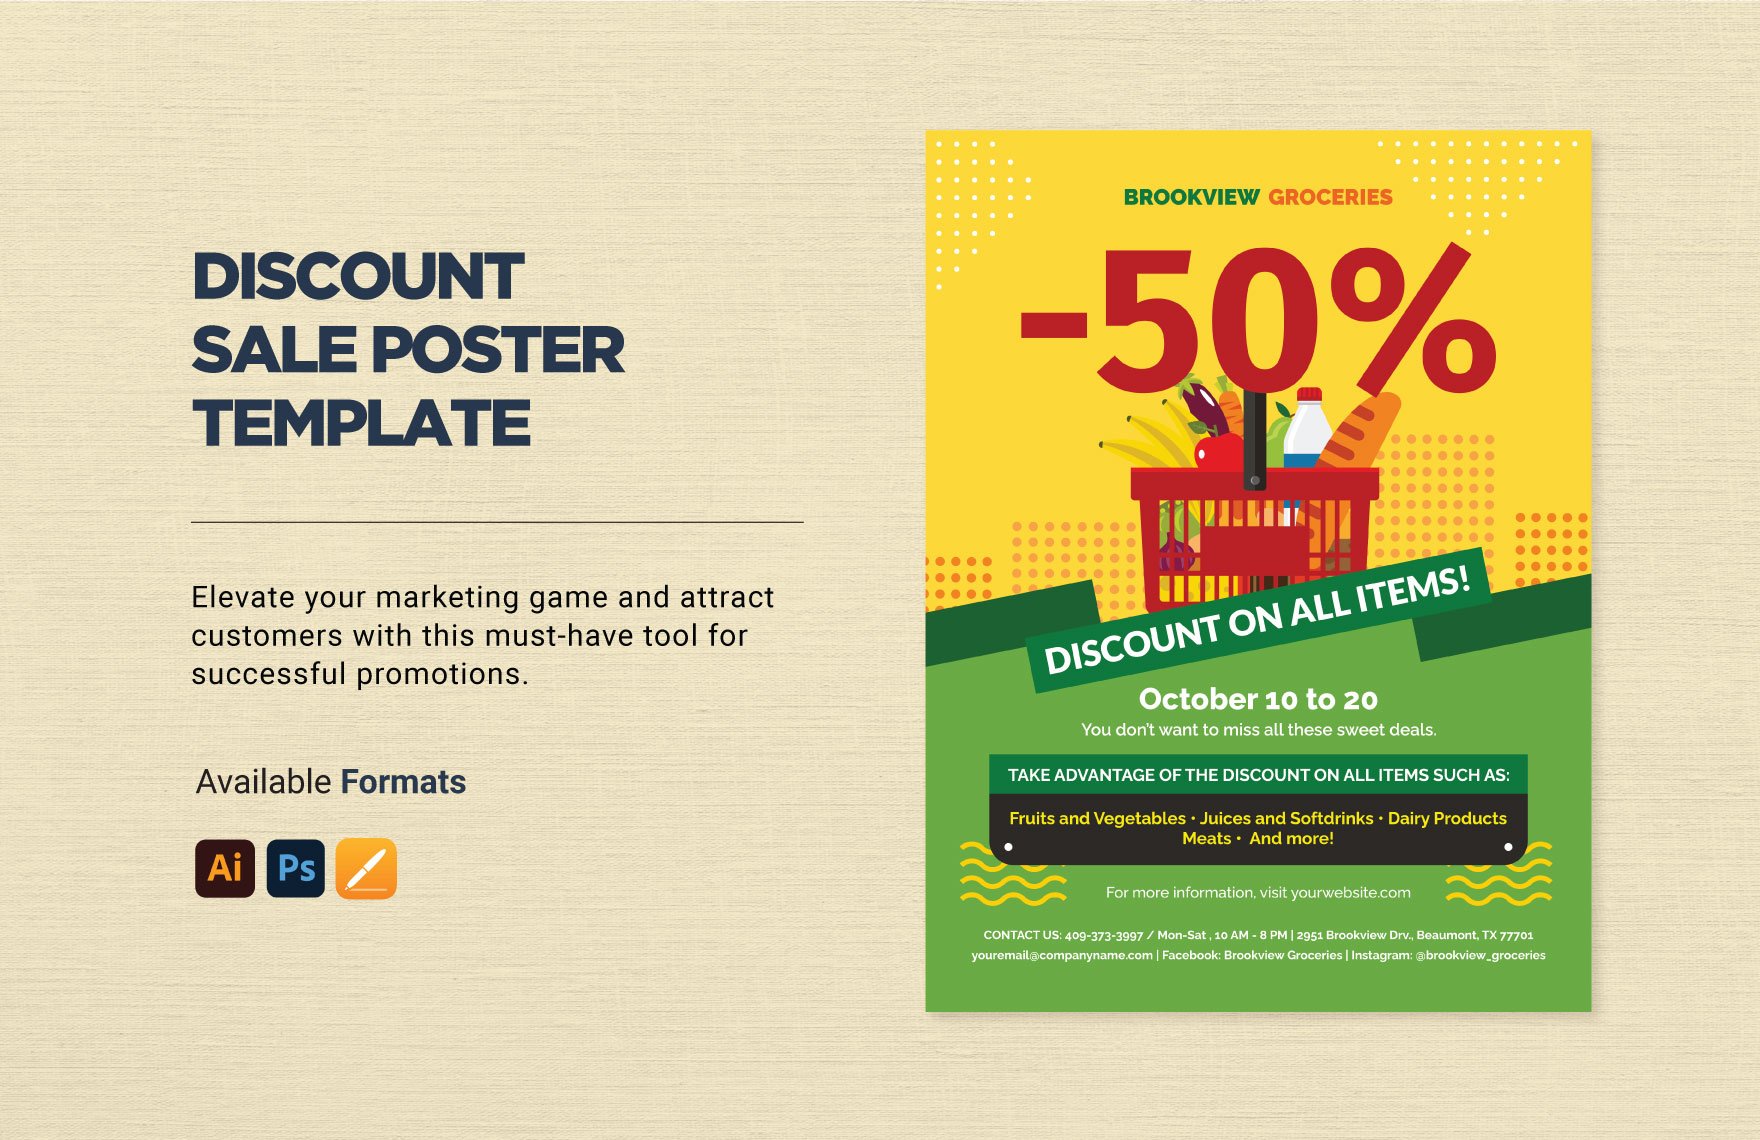 Discount Sale Poster Template in Illustrator, PSD, Apple Pages